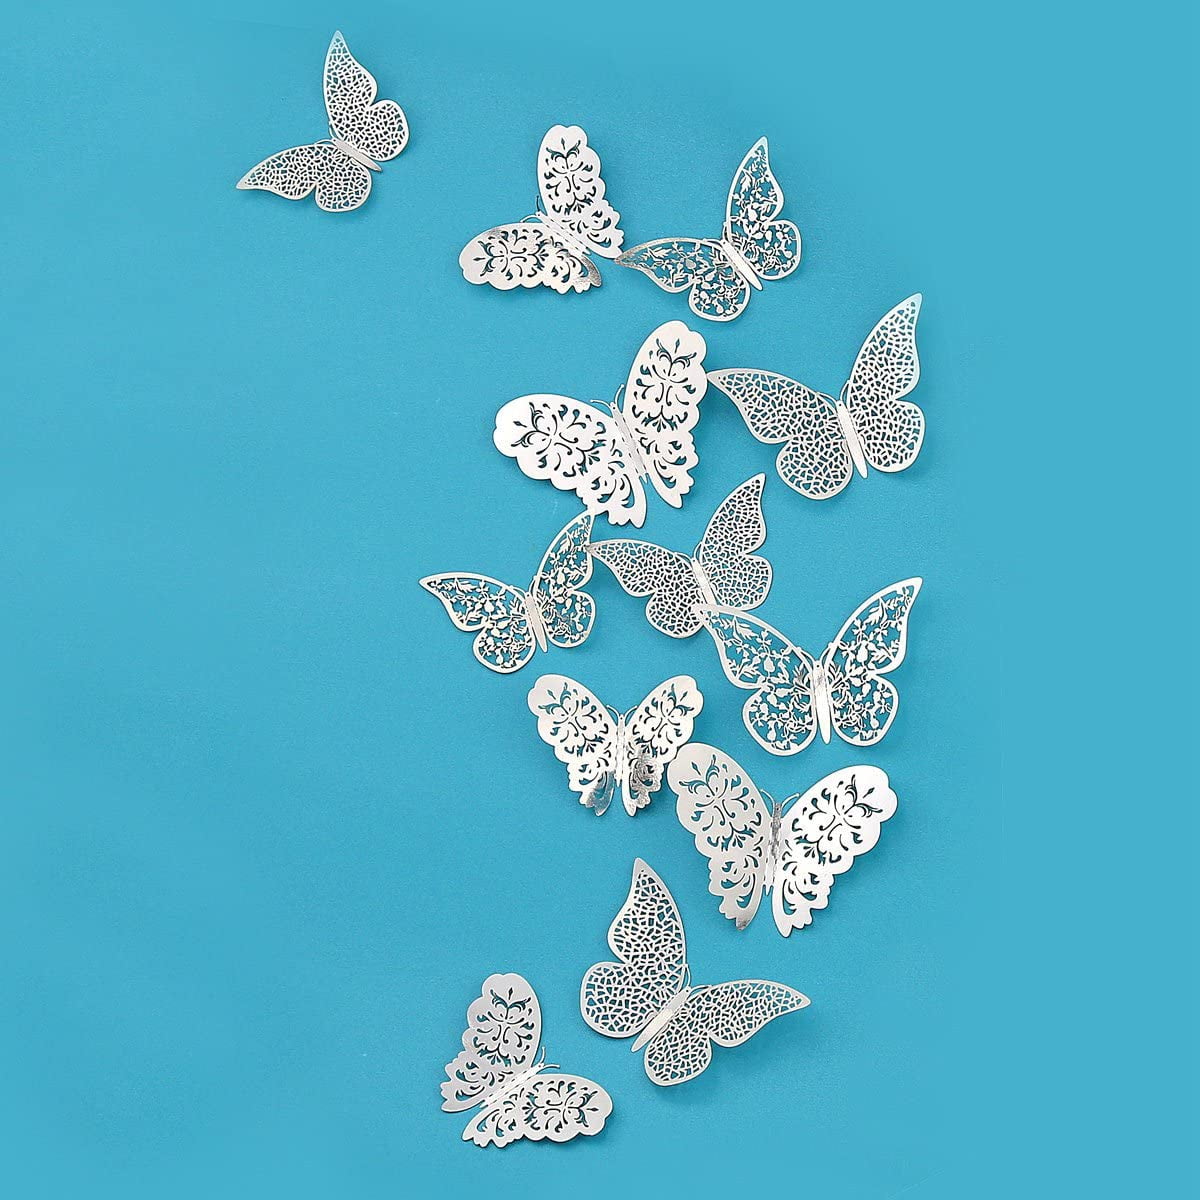 36PCS pinkblume Black Gray 3D Butterfly Wall Decor Decals Stickers Removable DIY Metallic Paper Butterflie Wall Murals Decorations for Home Living Room Babys Bedroom Showcase Nursery Wall Art Decor 